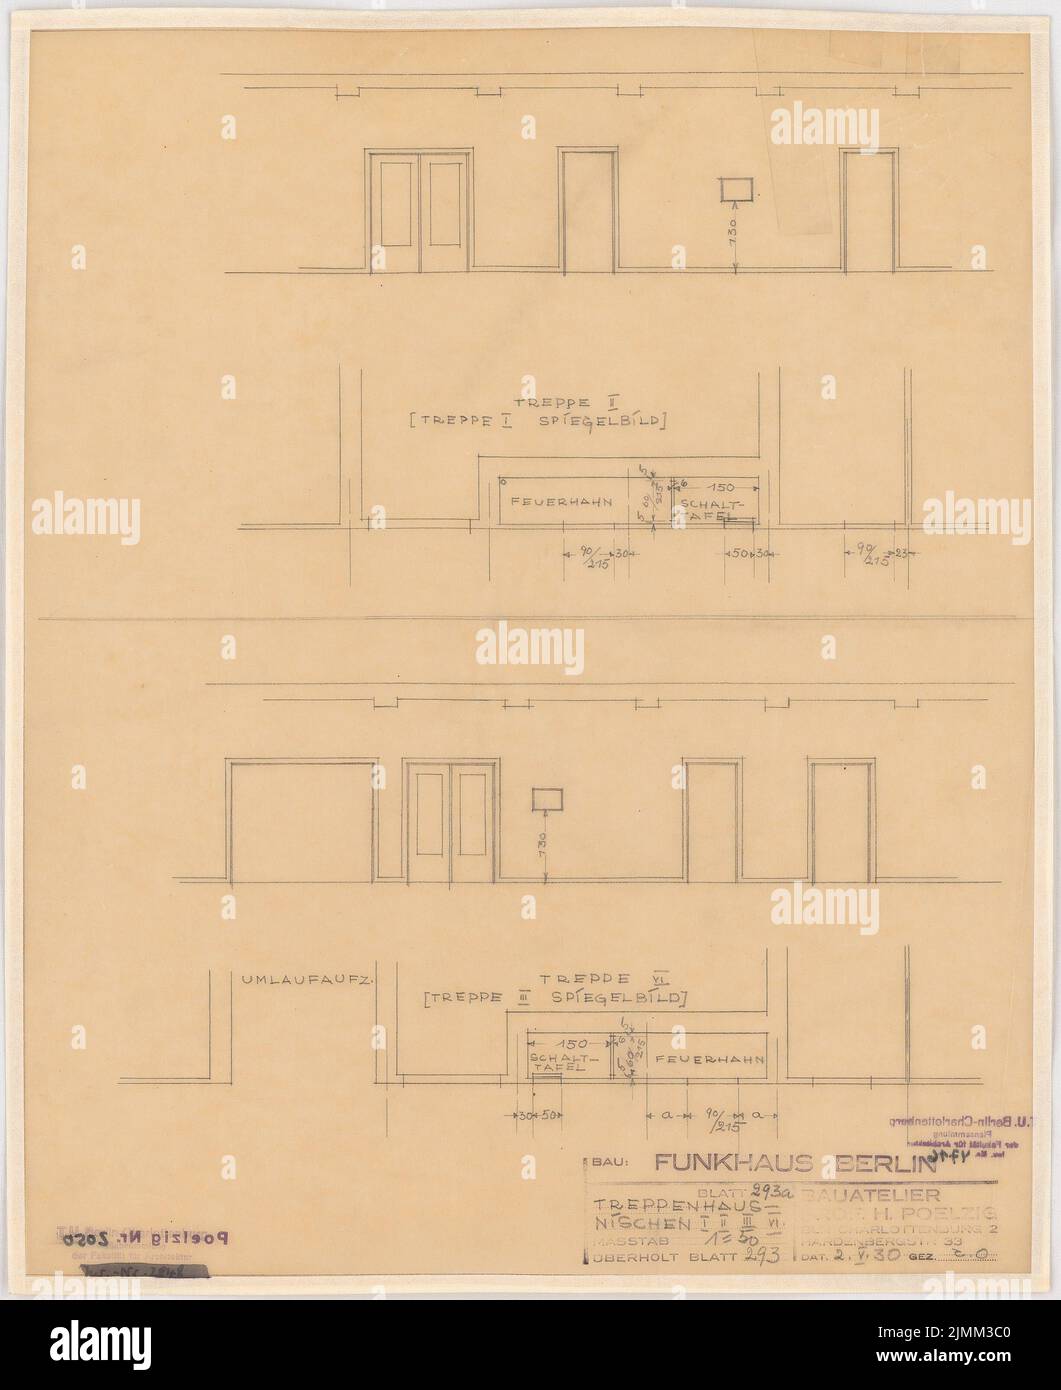 Poelzig Hans (1869-1936), House of Radio, Berlin (02.05.1930): Execution project, staircase niches I, II, III, VI, Upper, floor plan 1:50. Pencil on transparent, 46.3 x 37.8 cm (including scan edges) Stock Photo